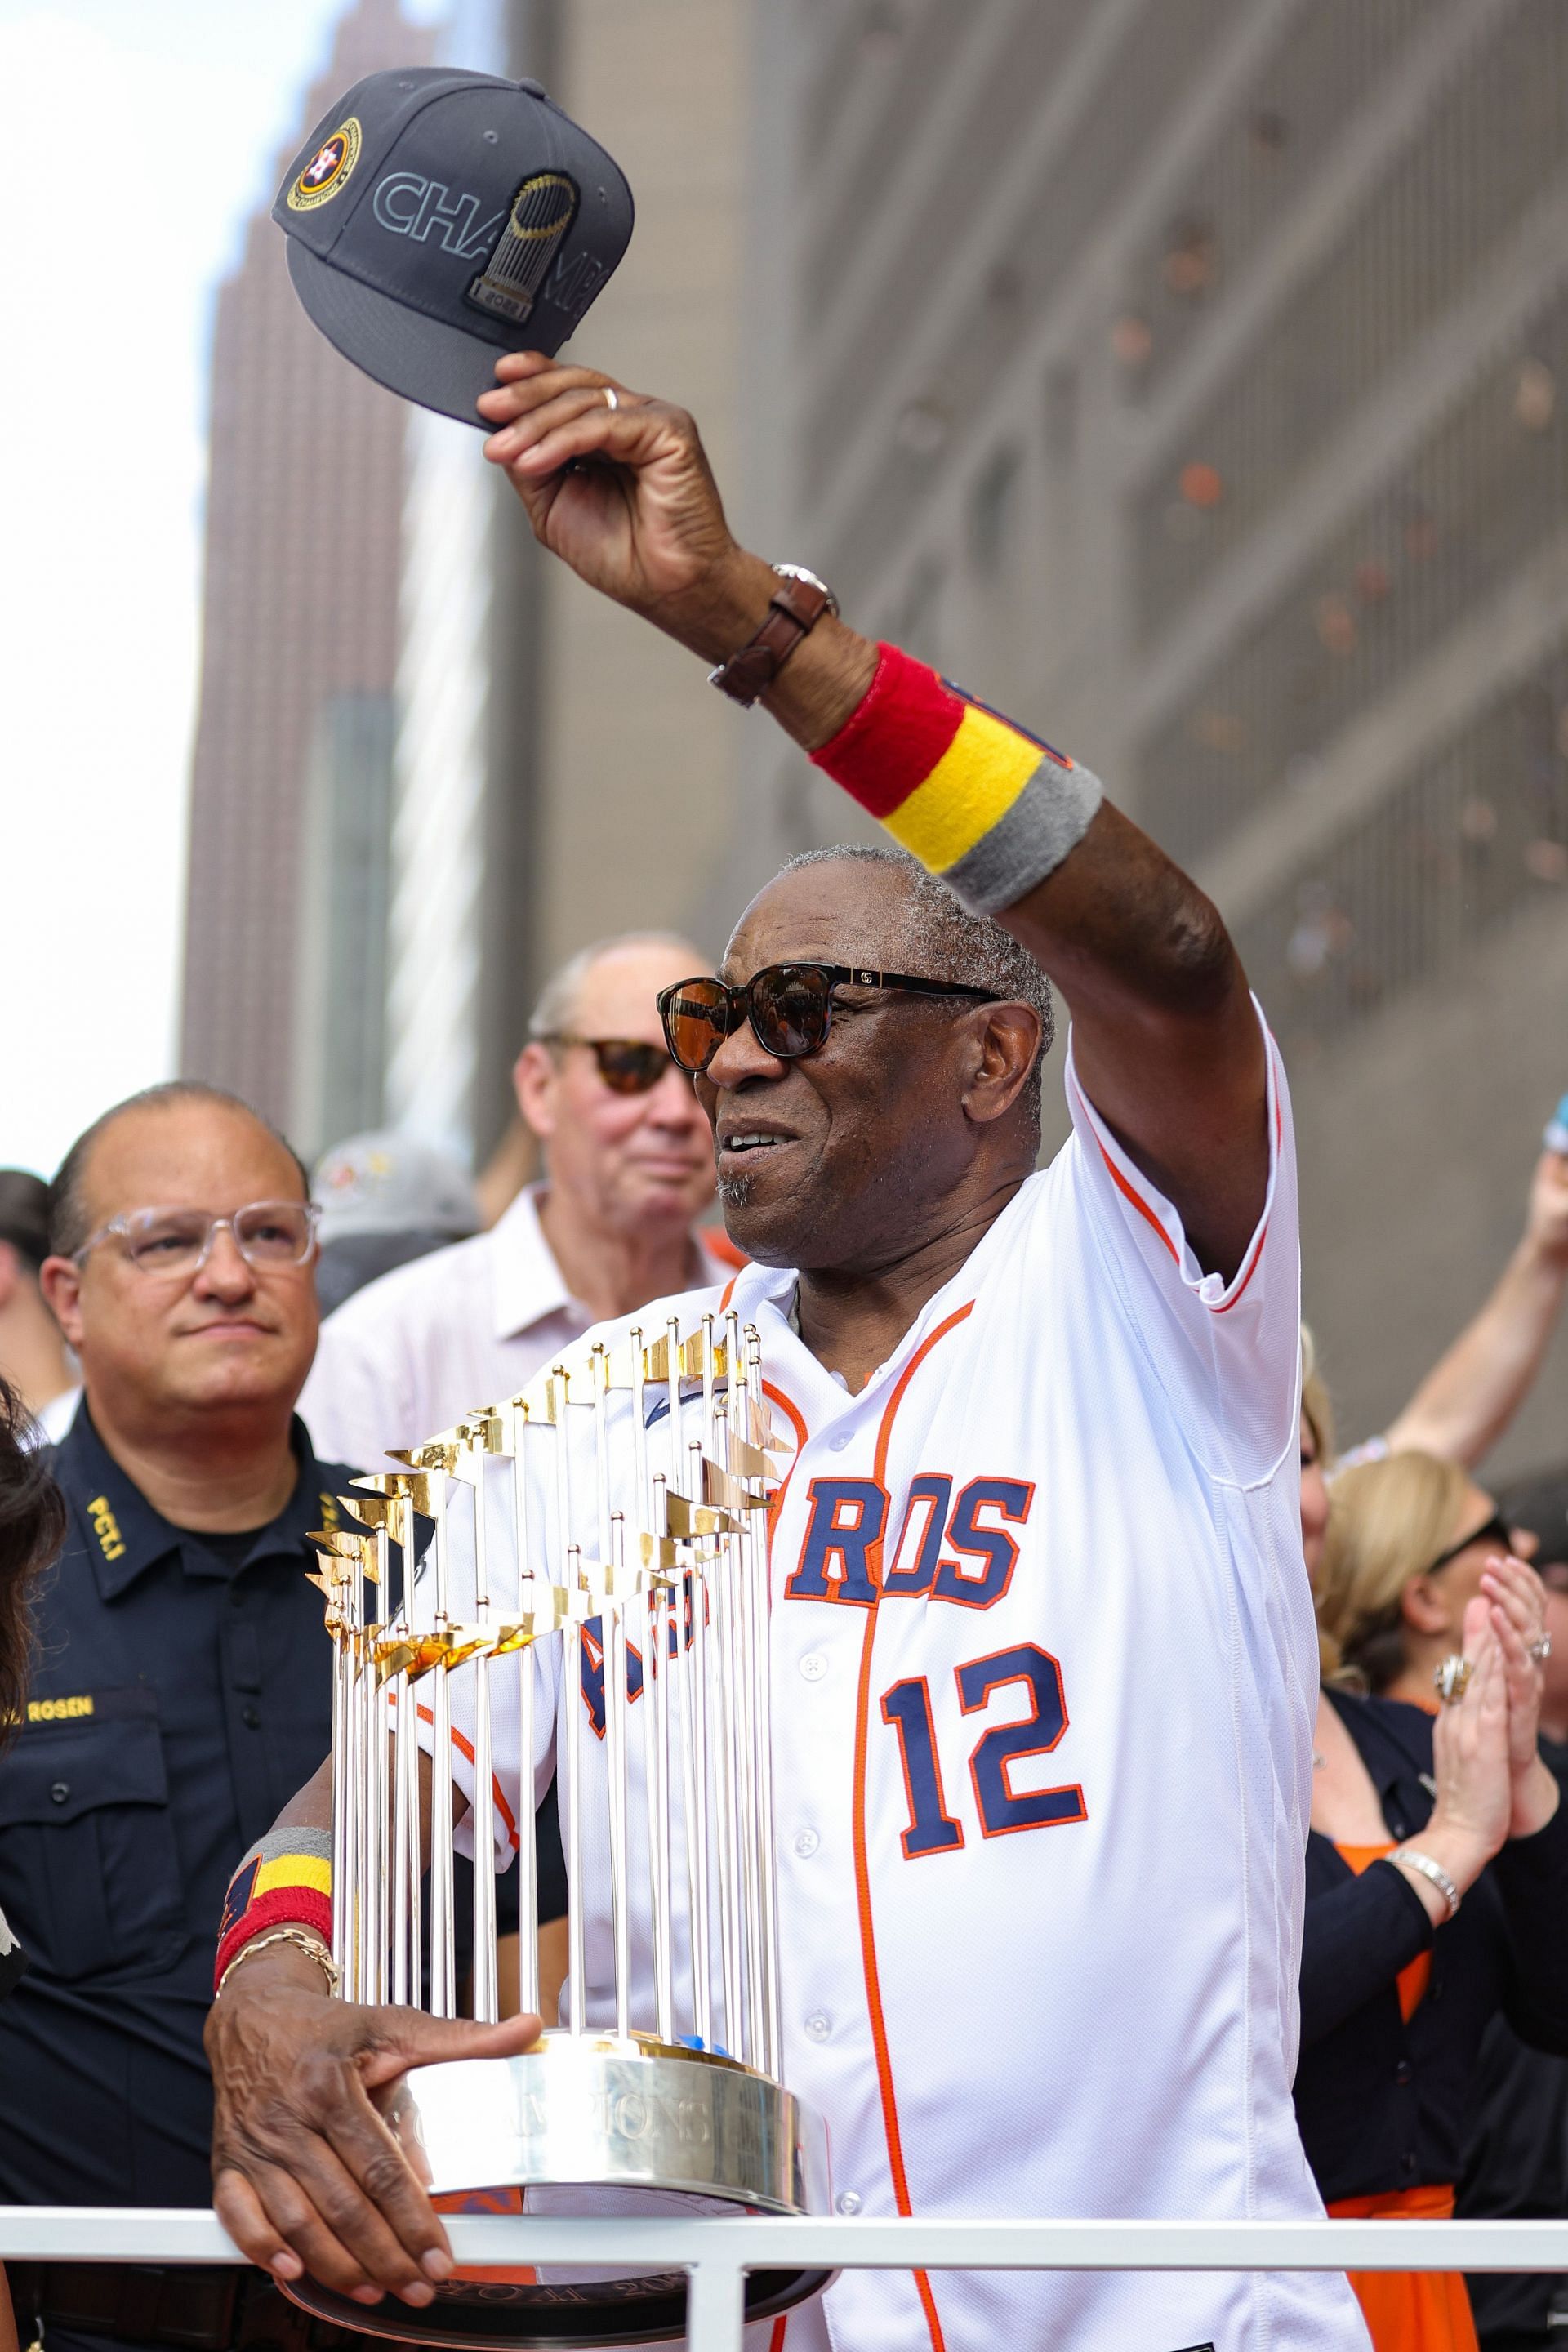 Dusty Baker won the World Series title in 2022 as a manager for the Houston Astros.